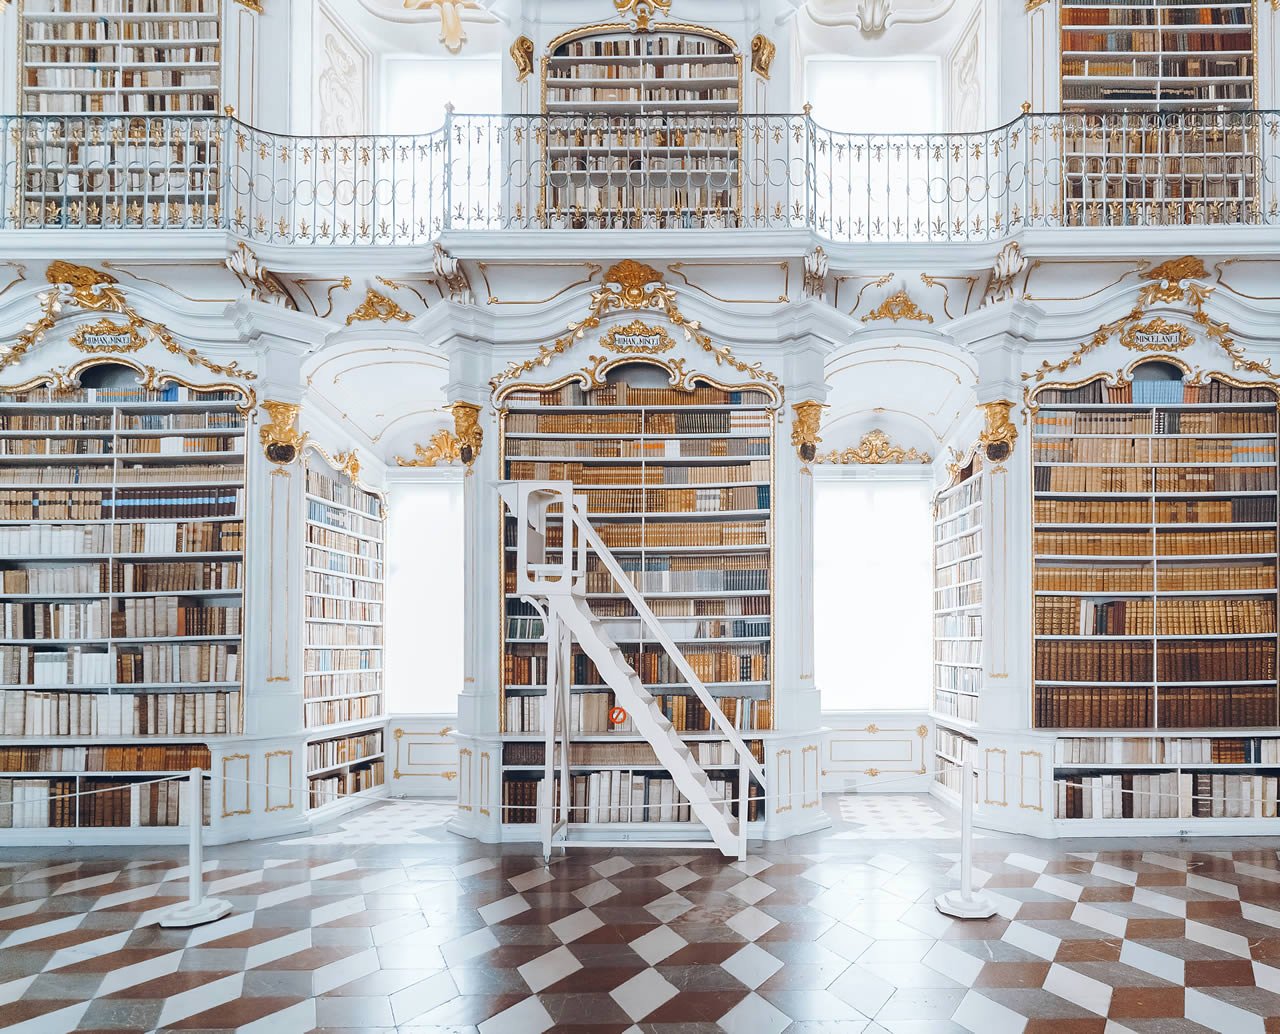 Admont Abbey Library Book Shelves